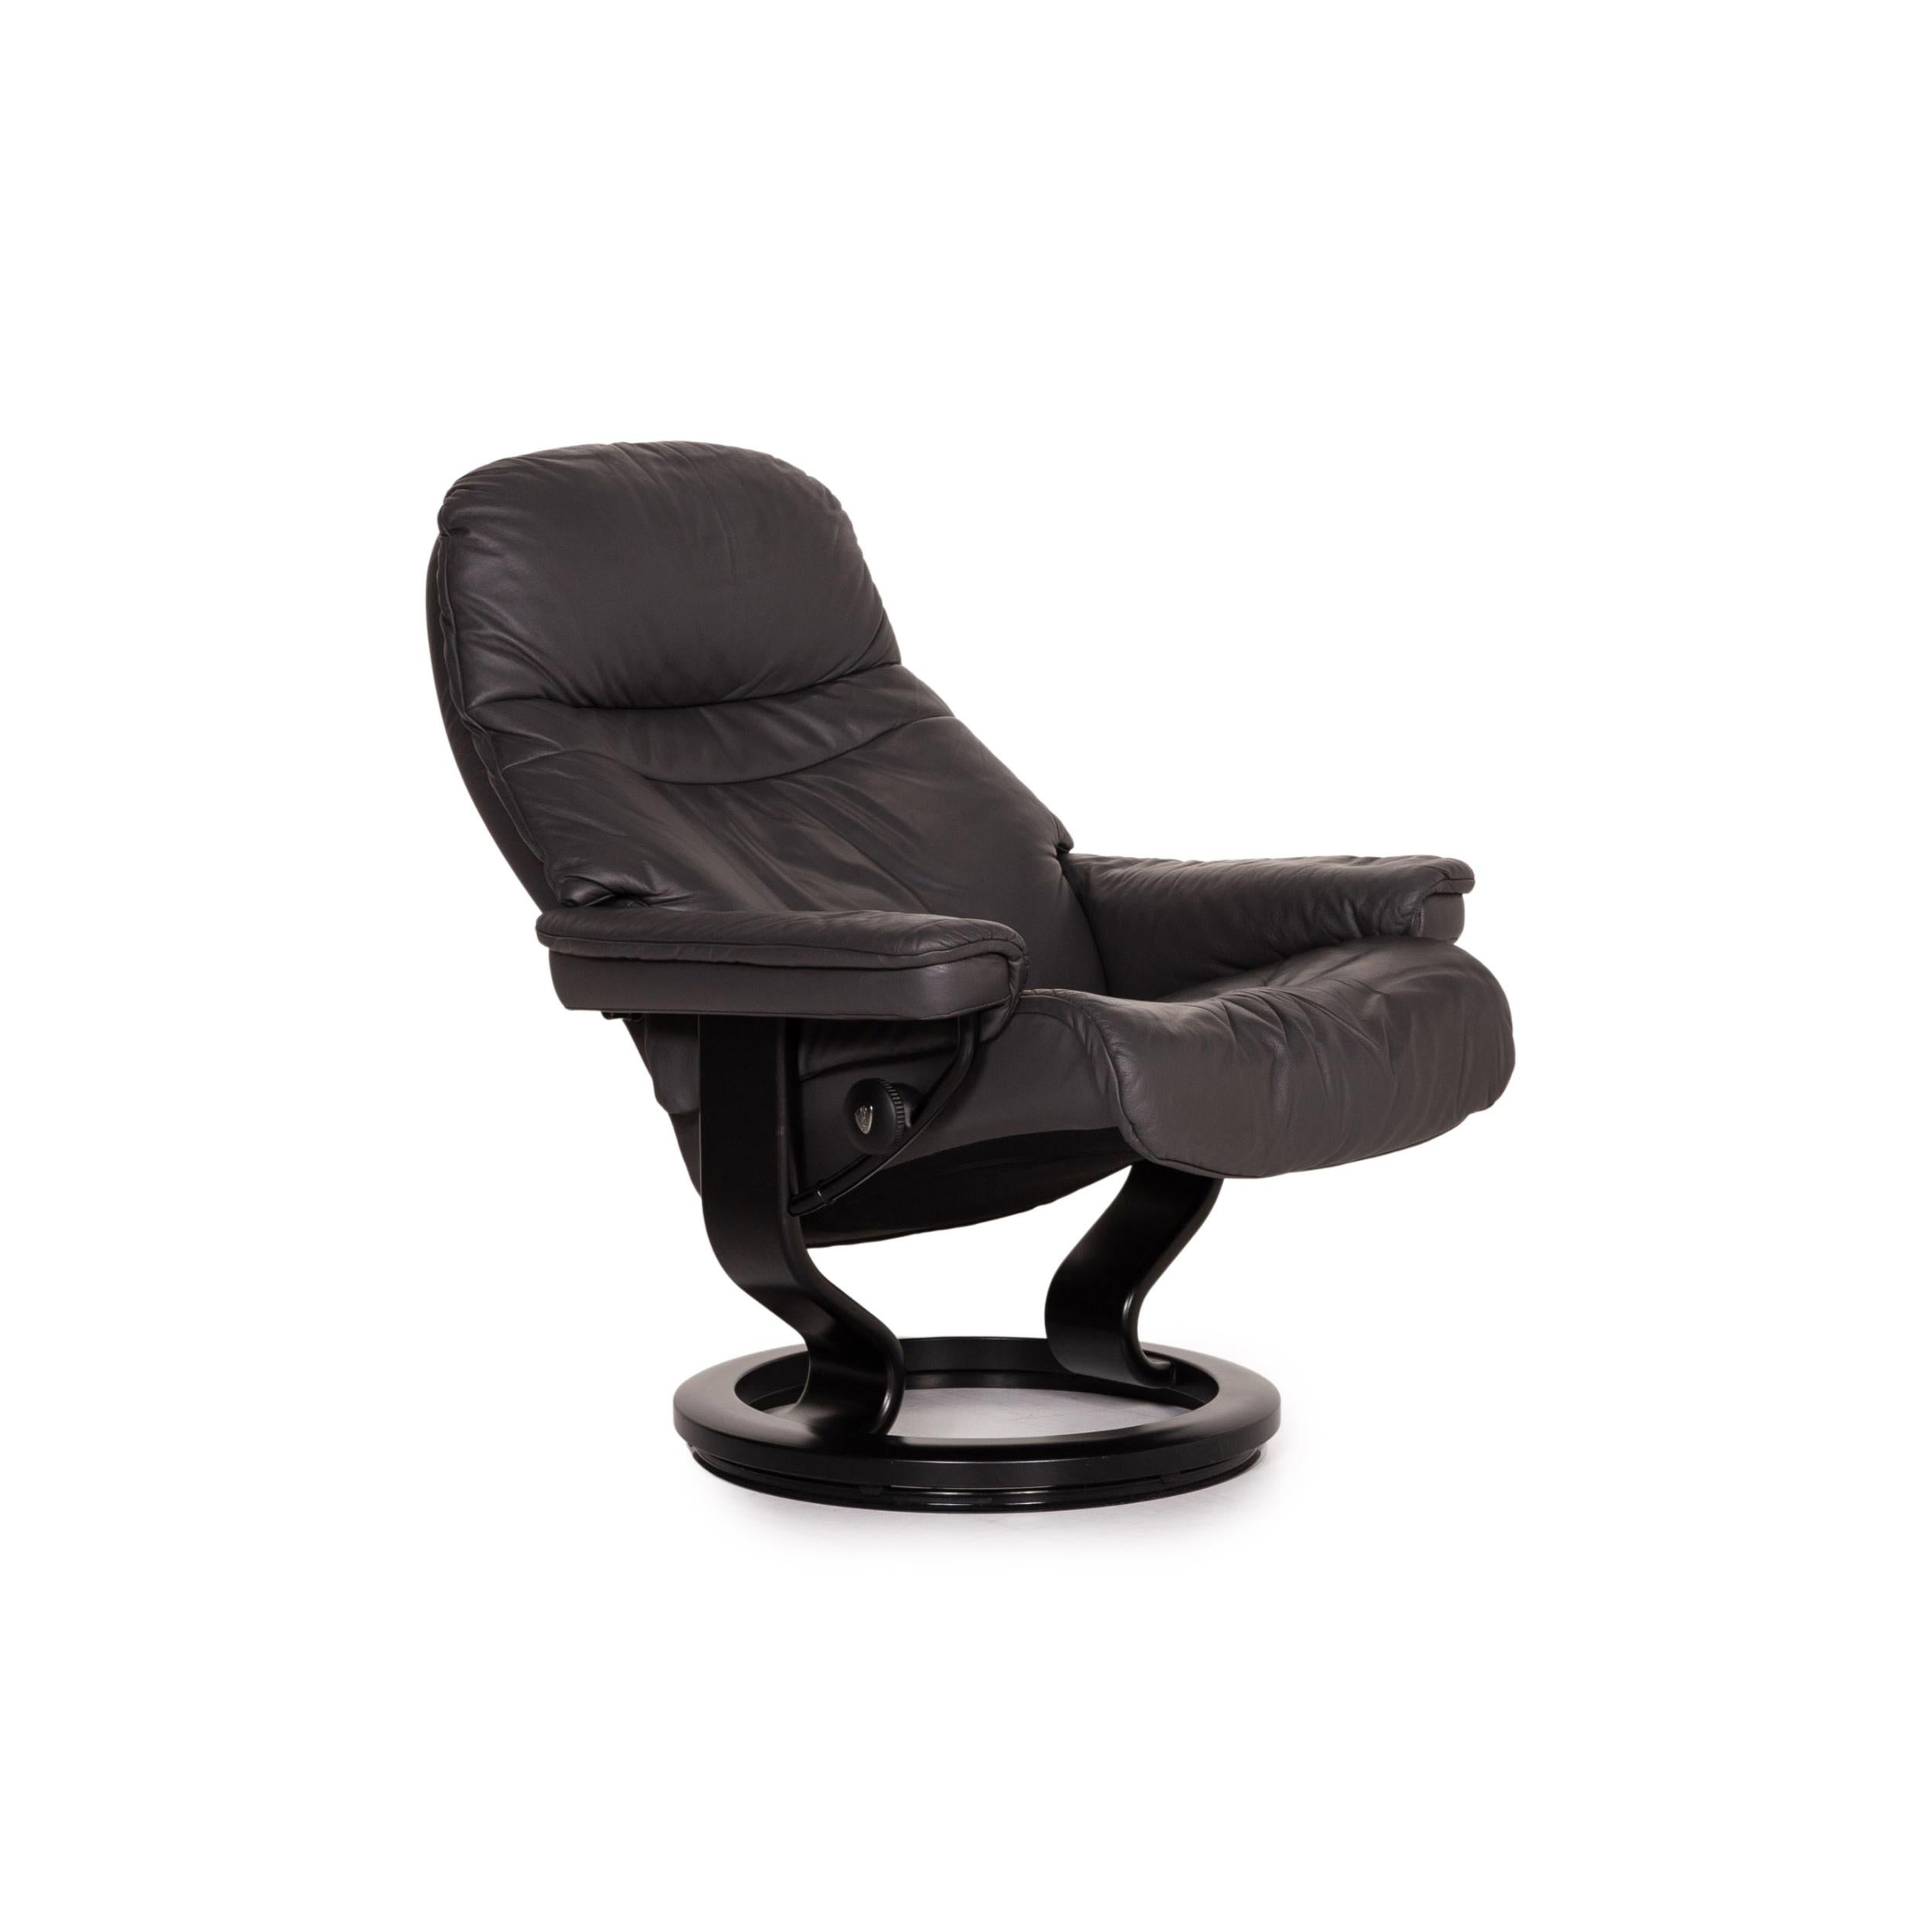 Modern Stressless Sunrise Leather Armchair Incl. Ottoman Gray Size M Relax Function